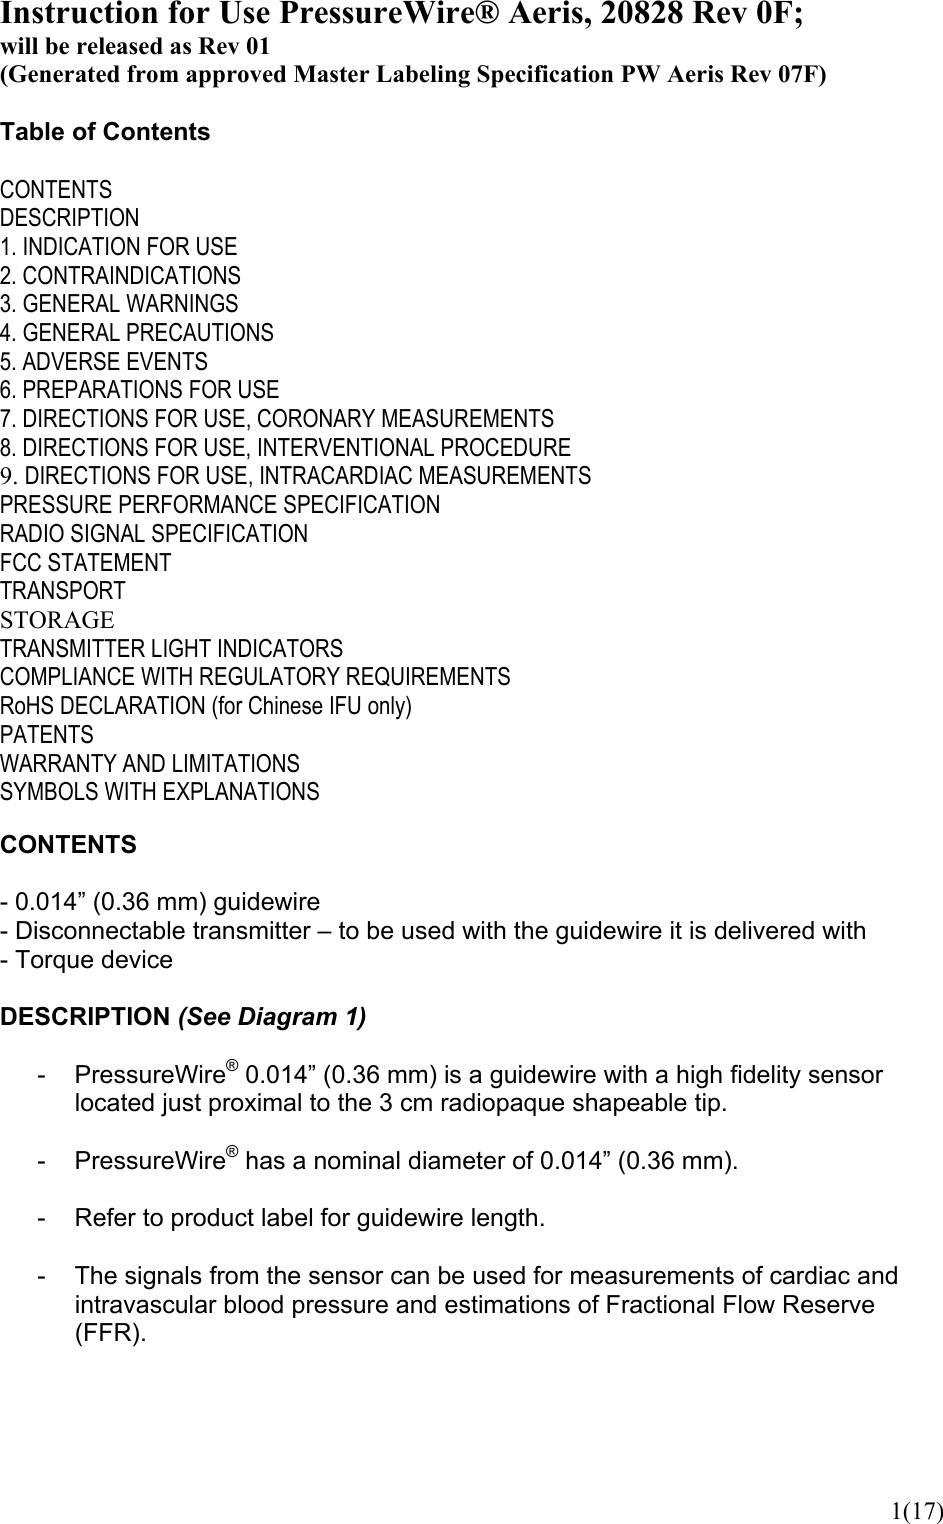  1(17)Instruction for Use PressureWire® Aeris, 20828 Rev 0F; will be released as Rev 01 (Generated from approved Master Labeling Specification PW Aeris Rev 07F)  Table of Contents  CONTENTS DESCRIPTION 1. INDICATION FOR USE 2. CONTRAINDICATIONS 3. GENERAL WARNINGS 4. GENERAL PRECAUTIONS 5. ADVERSE EVENTS 6. PREPARATIONS FOR USE 7. DIRECTIONS FOR USE, CORONARY MEASUREMENTS 8. DIRECTIONS FOR USE, INTERVENTIONAL PROCEDURE 9. DIRECTIONS FOR USE, INTRACARDIAC MEASUREMENTS PRESSURE PERFORMANCE SPECIFICATION RADIO SIGNAL SPECIFICATION FCC STATEMENT TRANSPORT STORAGE TRANSMITTER LIGHT INDICATORS COMPLIANCE WITH REGULATORY REQUIREMENTS RoHS DECLARATION (for Chinese IFU only) PATENTS WARRANTY AND LIMITATIONS SYMBOLS WITH EXPLANATIONS  CONTENTS  - 0.014” (0.36 mm) guidewire - Disconnectable transmitter – to be used with the guidewire it is delivered with - Torque device  DESCRIPTION (See Diagram 1)  - PressureWire® 0.014” (0.36 mm) is a guidewire with a high fidelity sensor located just proximal to the 3 cm radiopaque shapeable tip.  - PressureWire® has a nominal diameter of 0.014” (0.36 mm).  -  Refer to product label for guidewire length.  -  The signals from the sensor can be used for measurements of cardiac and intravascular blood pressure and estimations of Fractional Flow Reserve (FFR).    